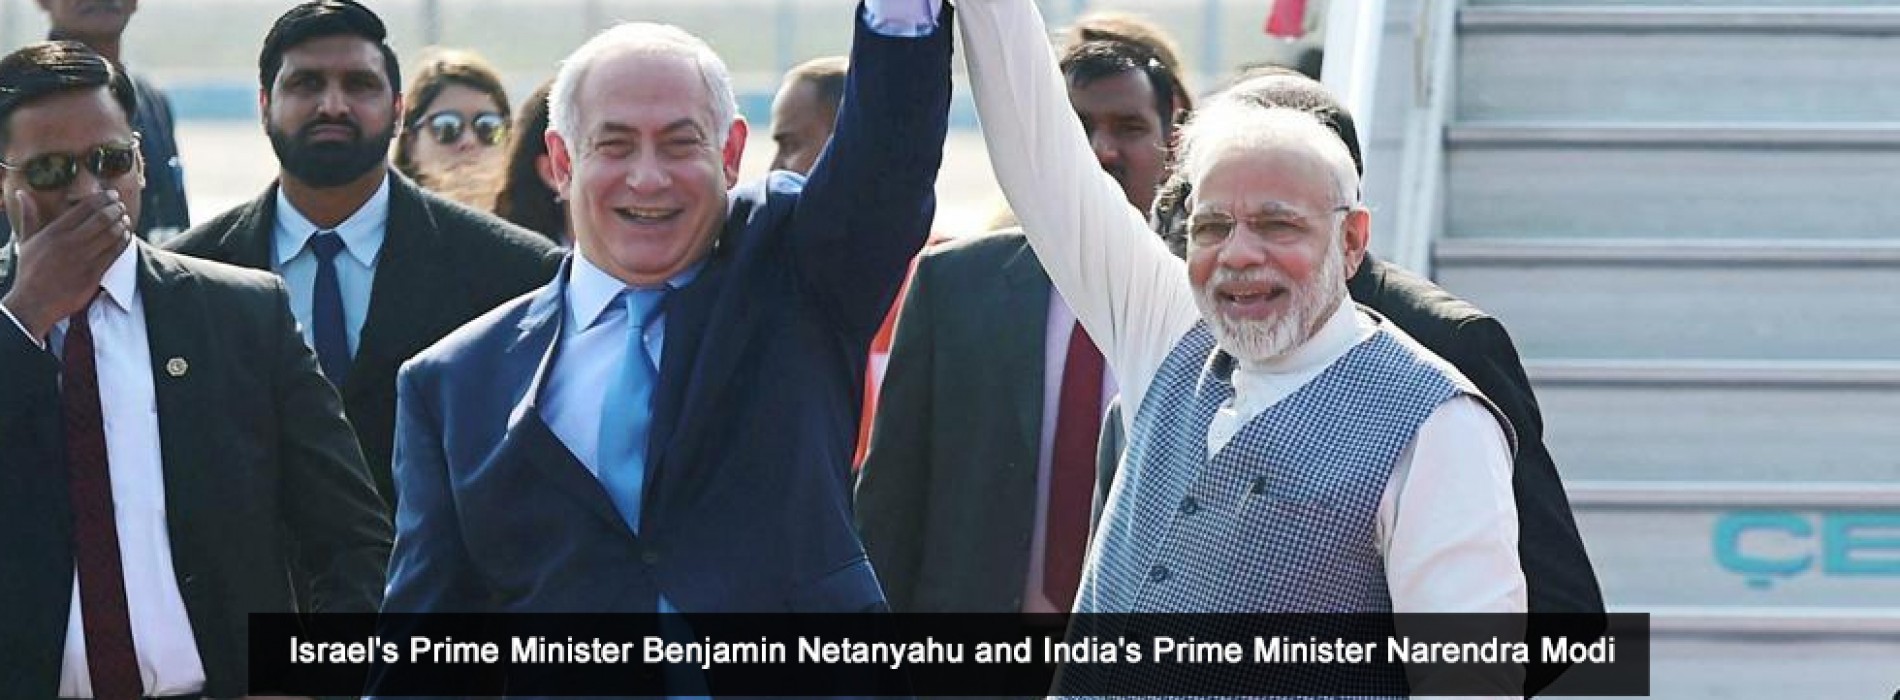 India-Israel sign bilateral agreements on energy, cyber security